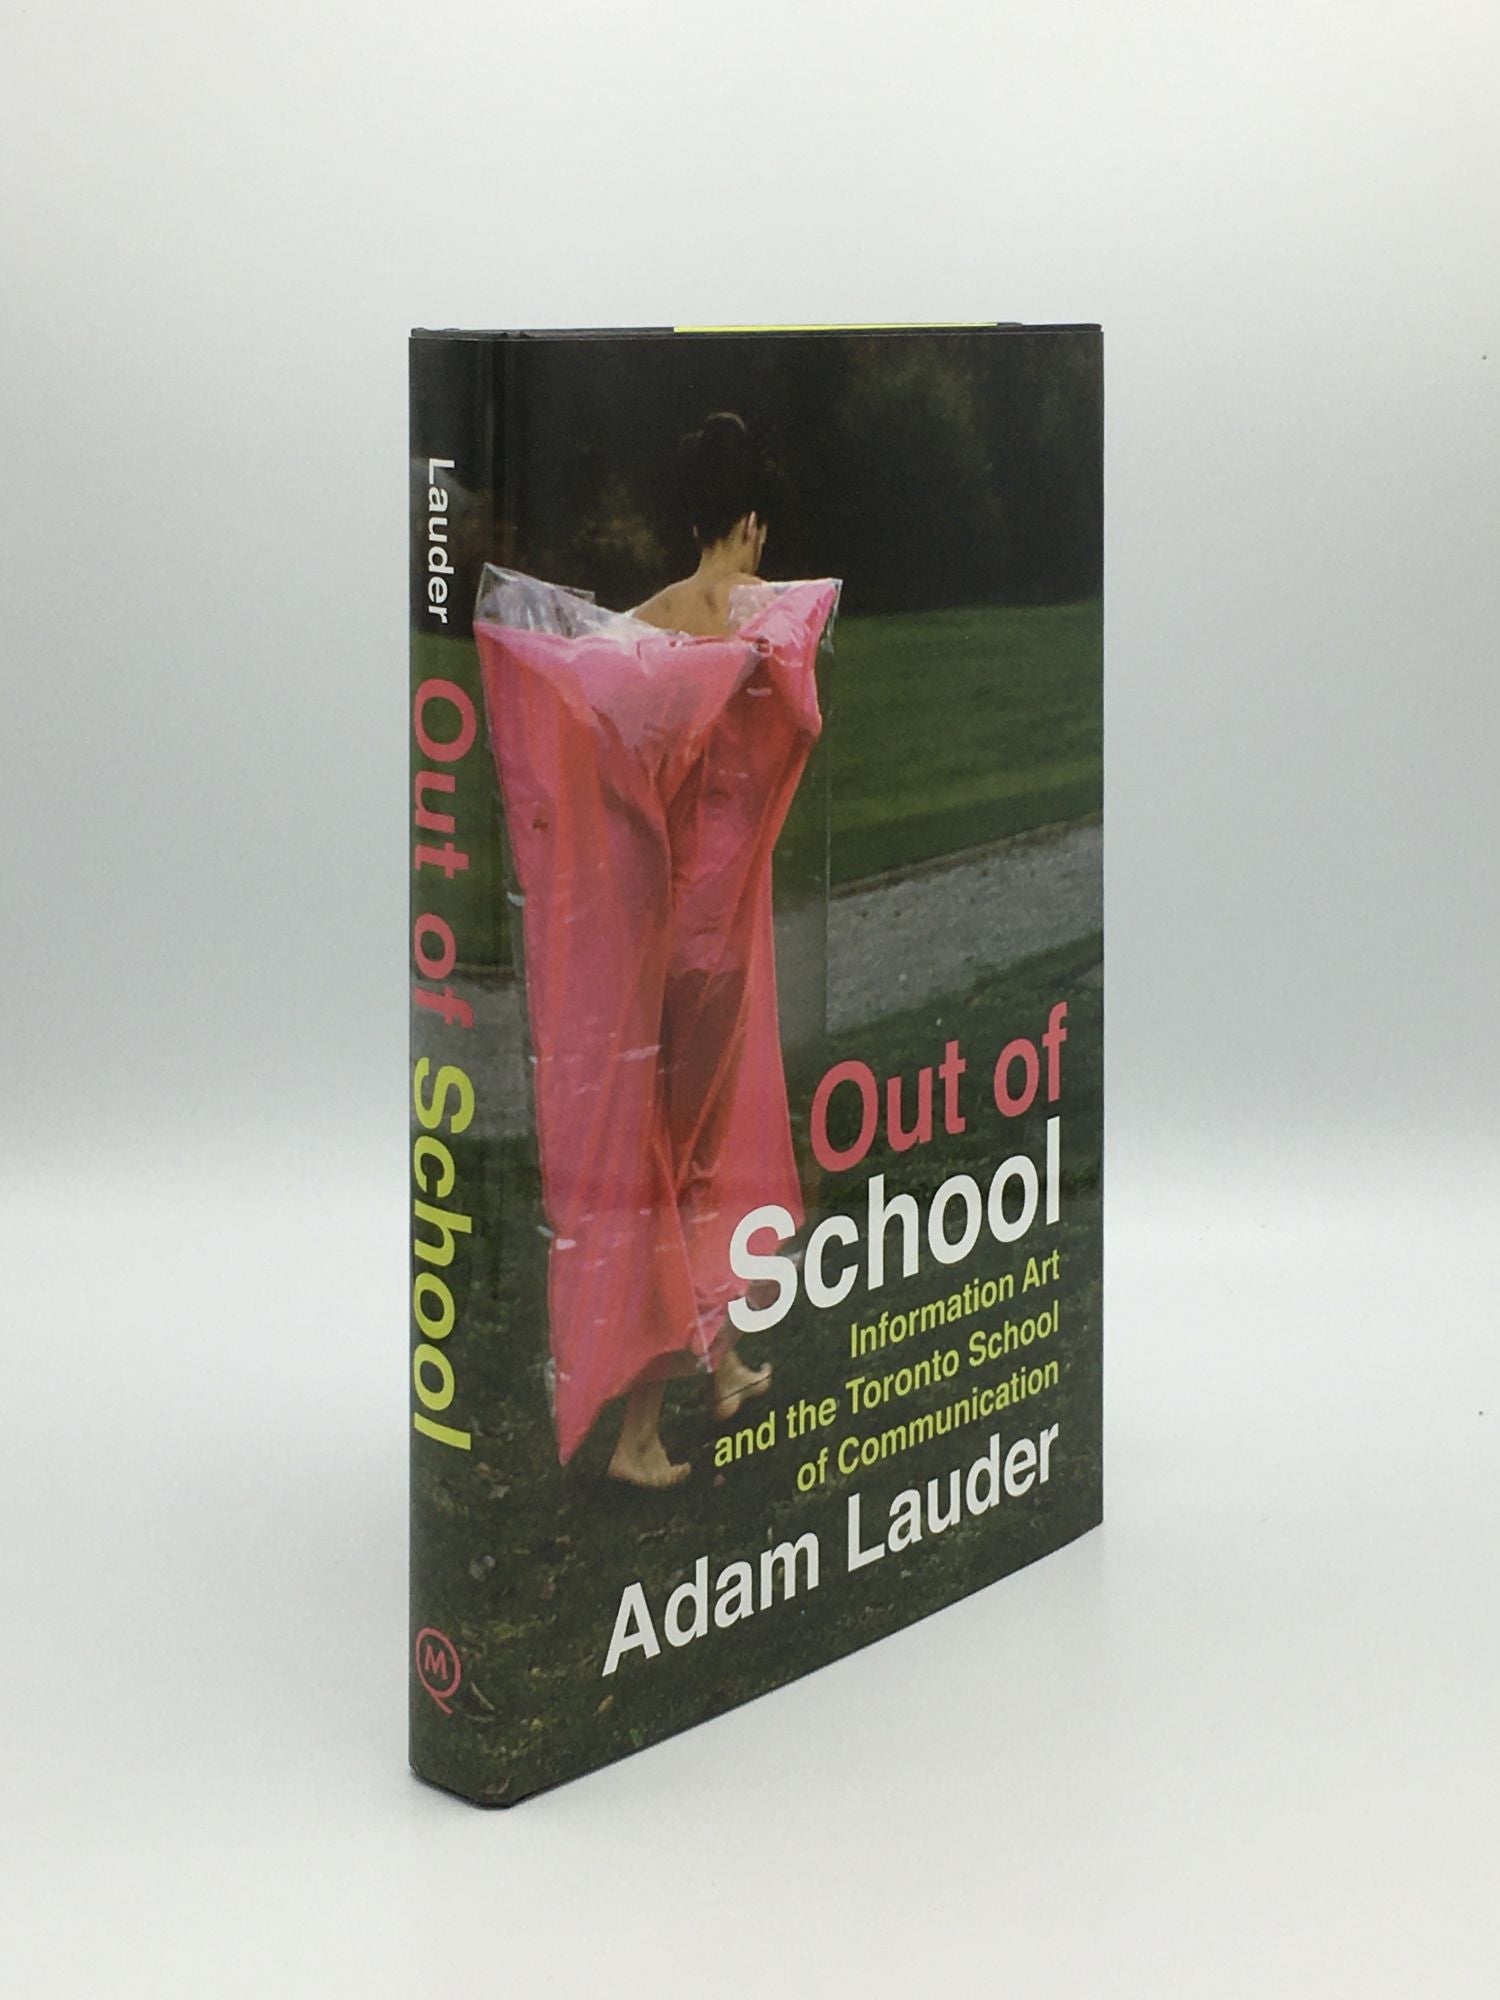 LAUDER Adam - Out of School Information Art and the Toronto School of Communication